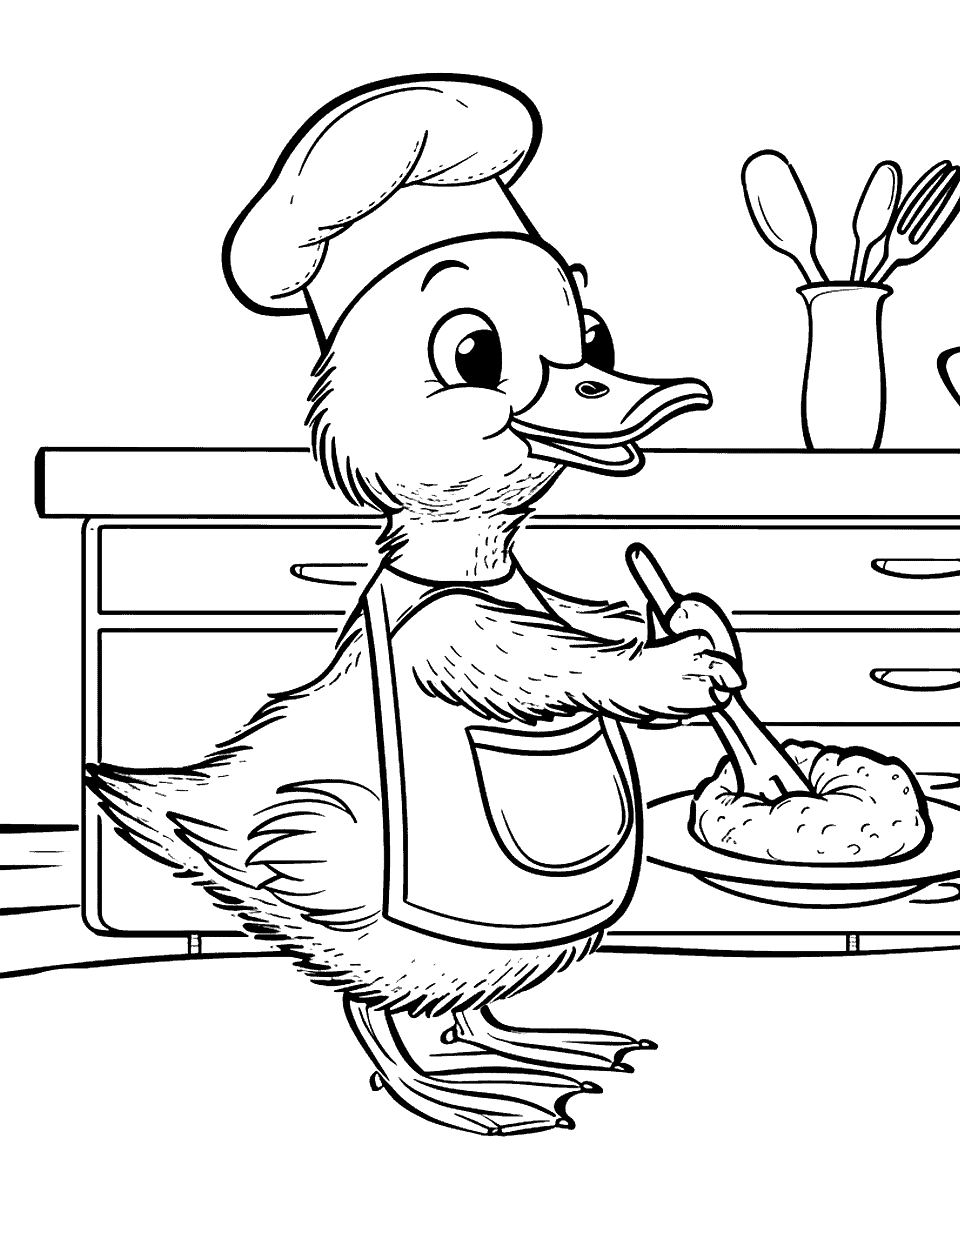 Duck Chef Cooking Coloring Page - A duck wearing a chef’s hat and apron cooking a delicious meal in the kitchen.